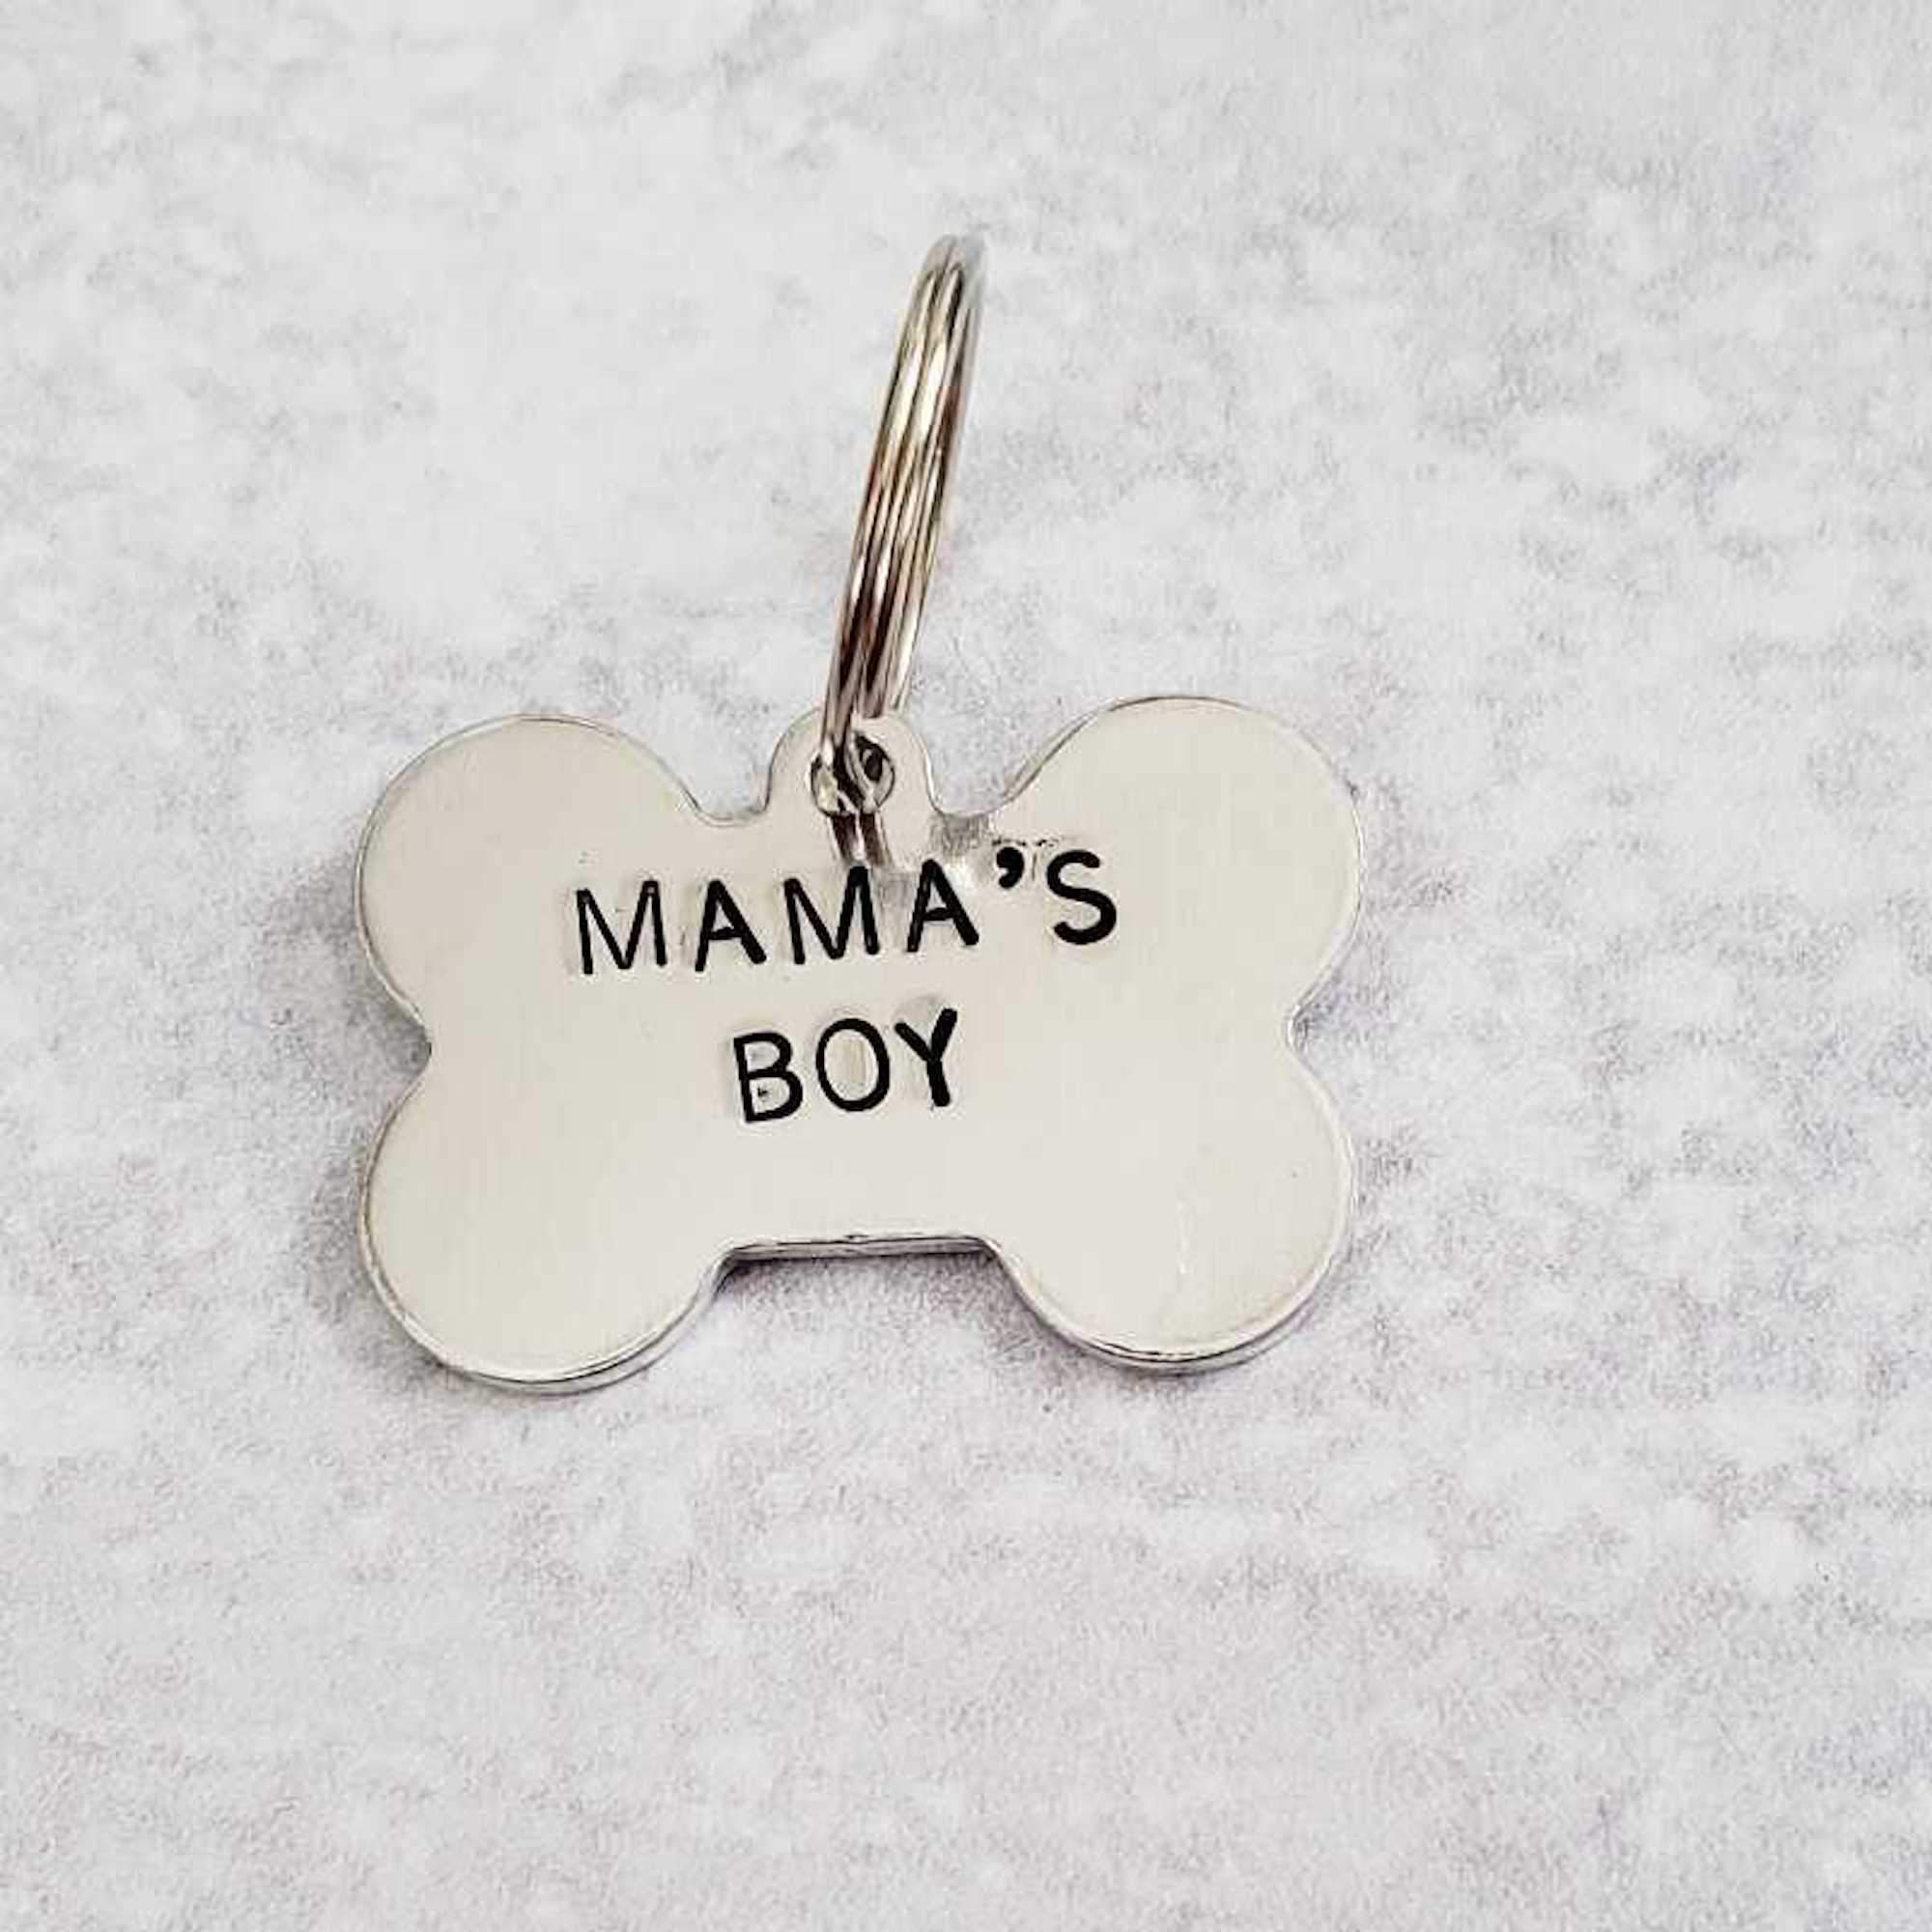 MAMA'S BOY / DADDY'S GIRL Bone-Shaped Pet Tag Salt and Sparkle